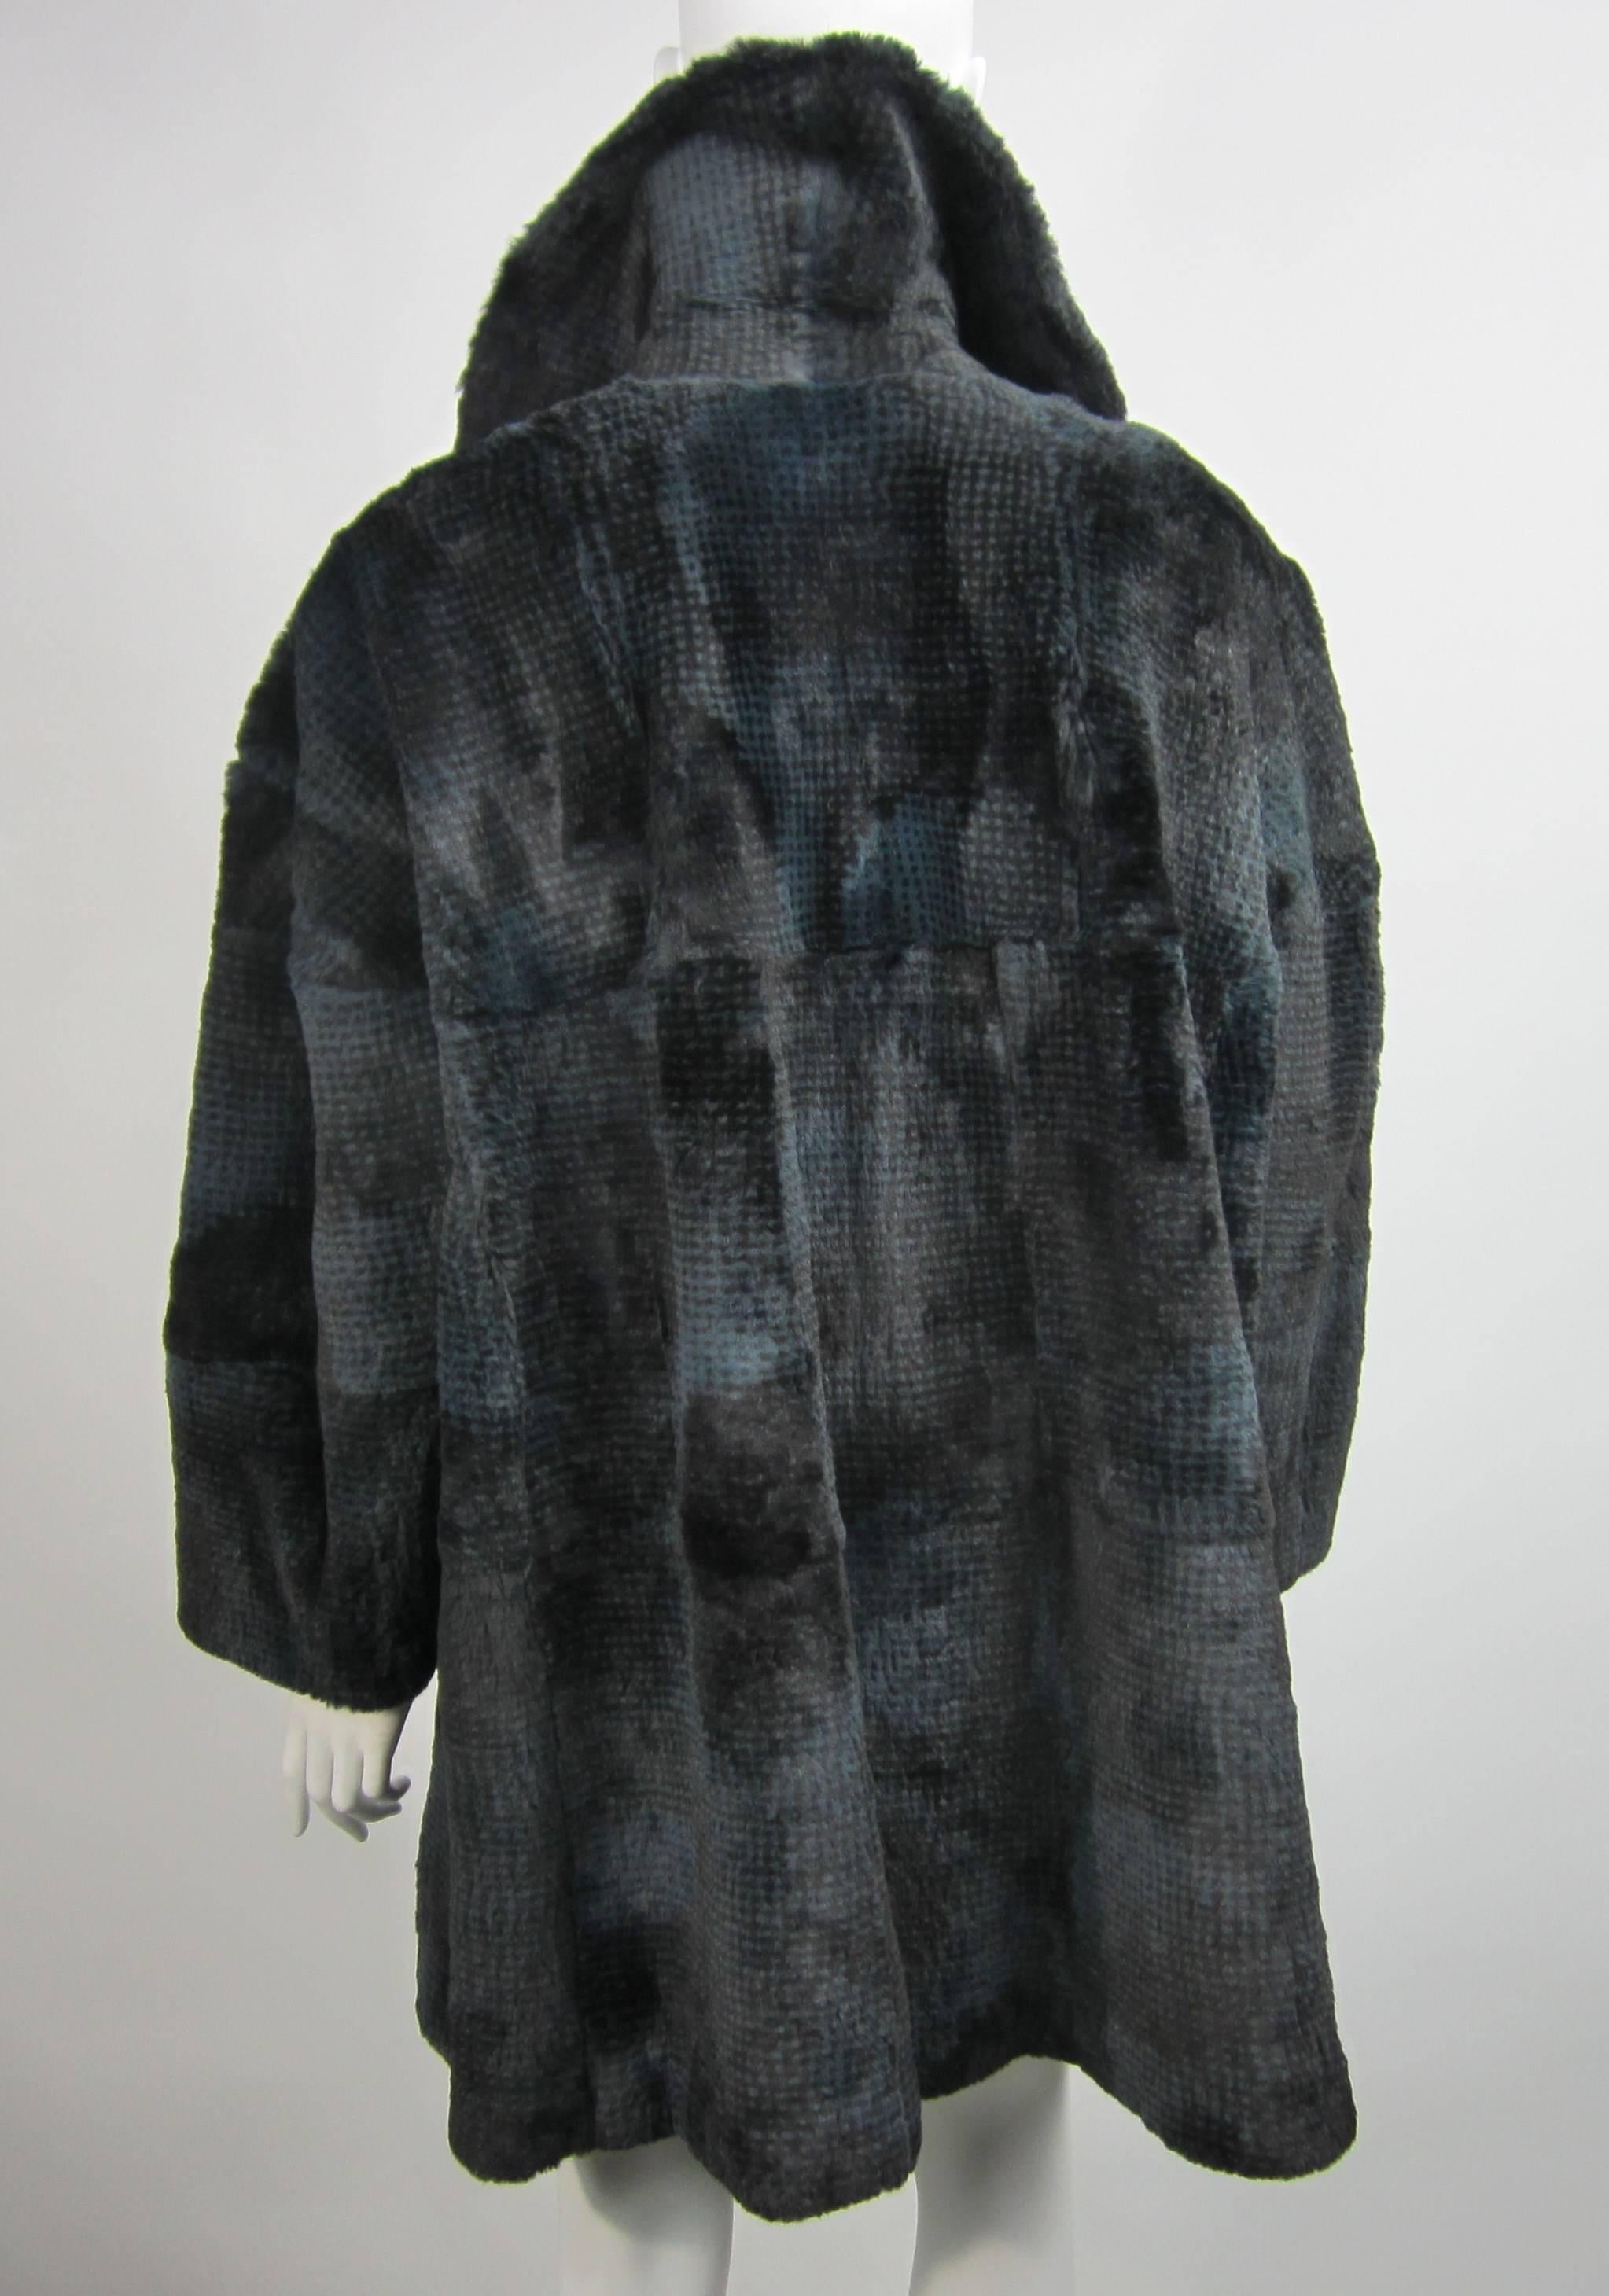  Revillon Mink Sheared fur Jacket Paris Made Large Unisex Coat  In Good Condition For Sale In Wallkill, NY